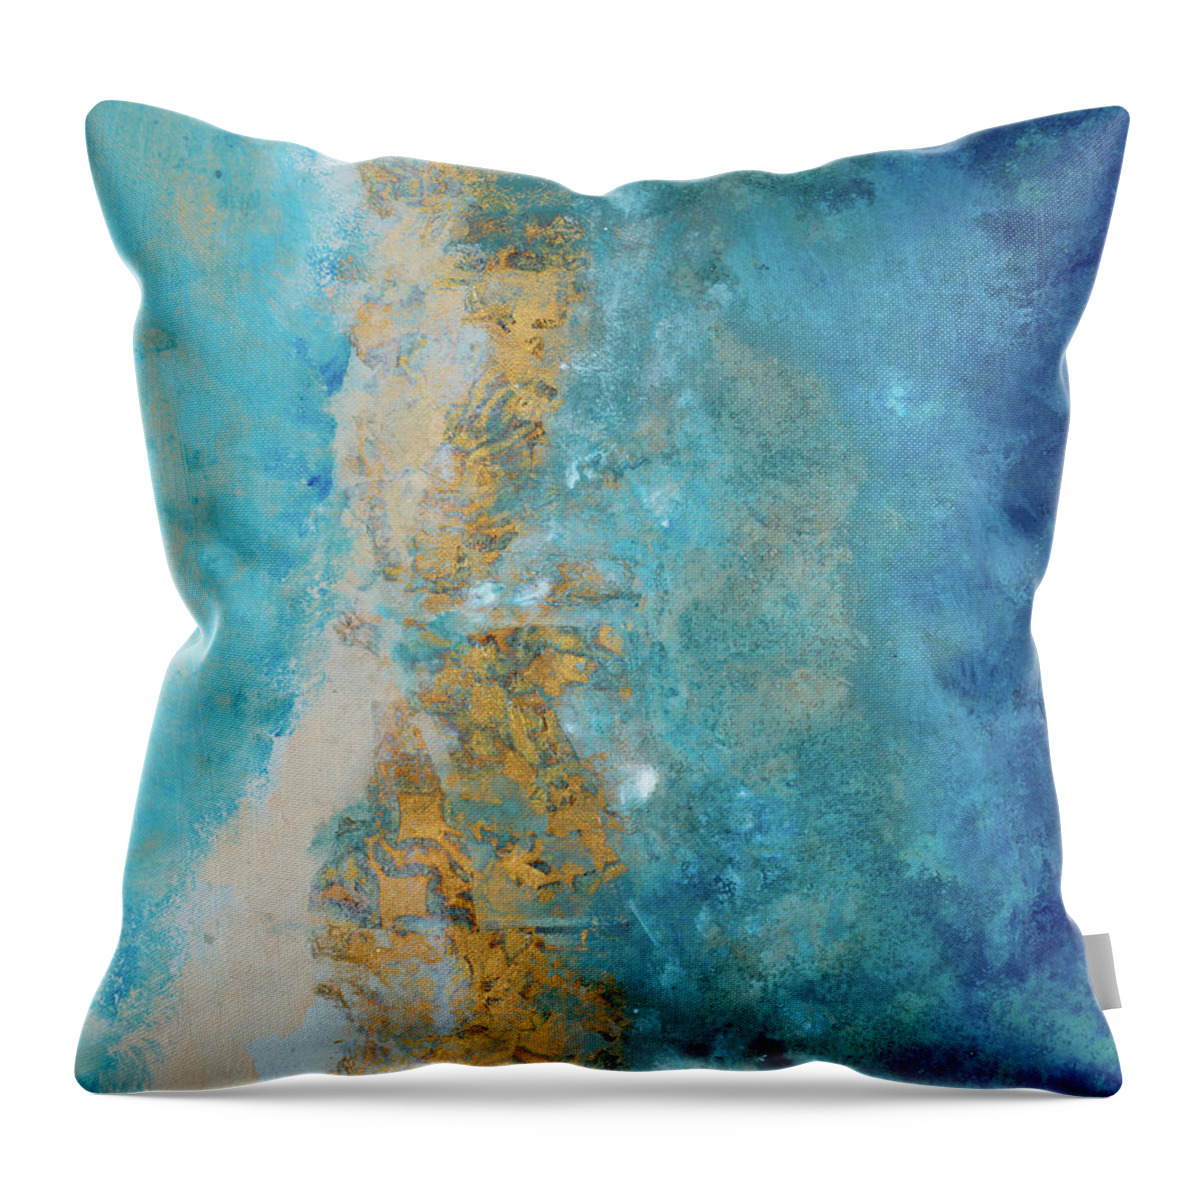 Coastline Throw Pillow featuring the photograph Coastline Vertical Abstract I by Merri Pattinian